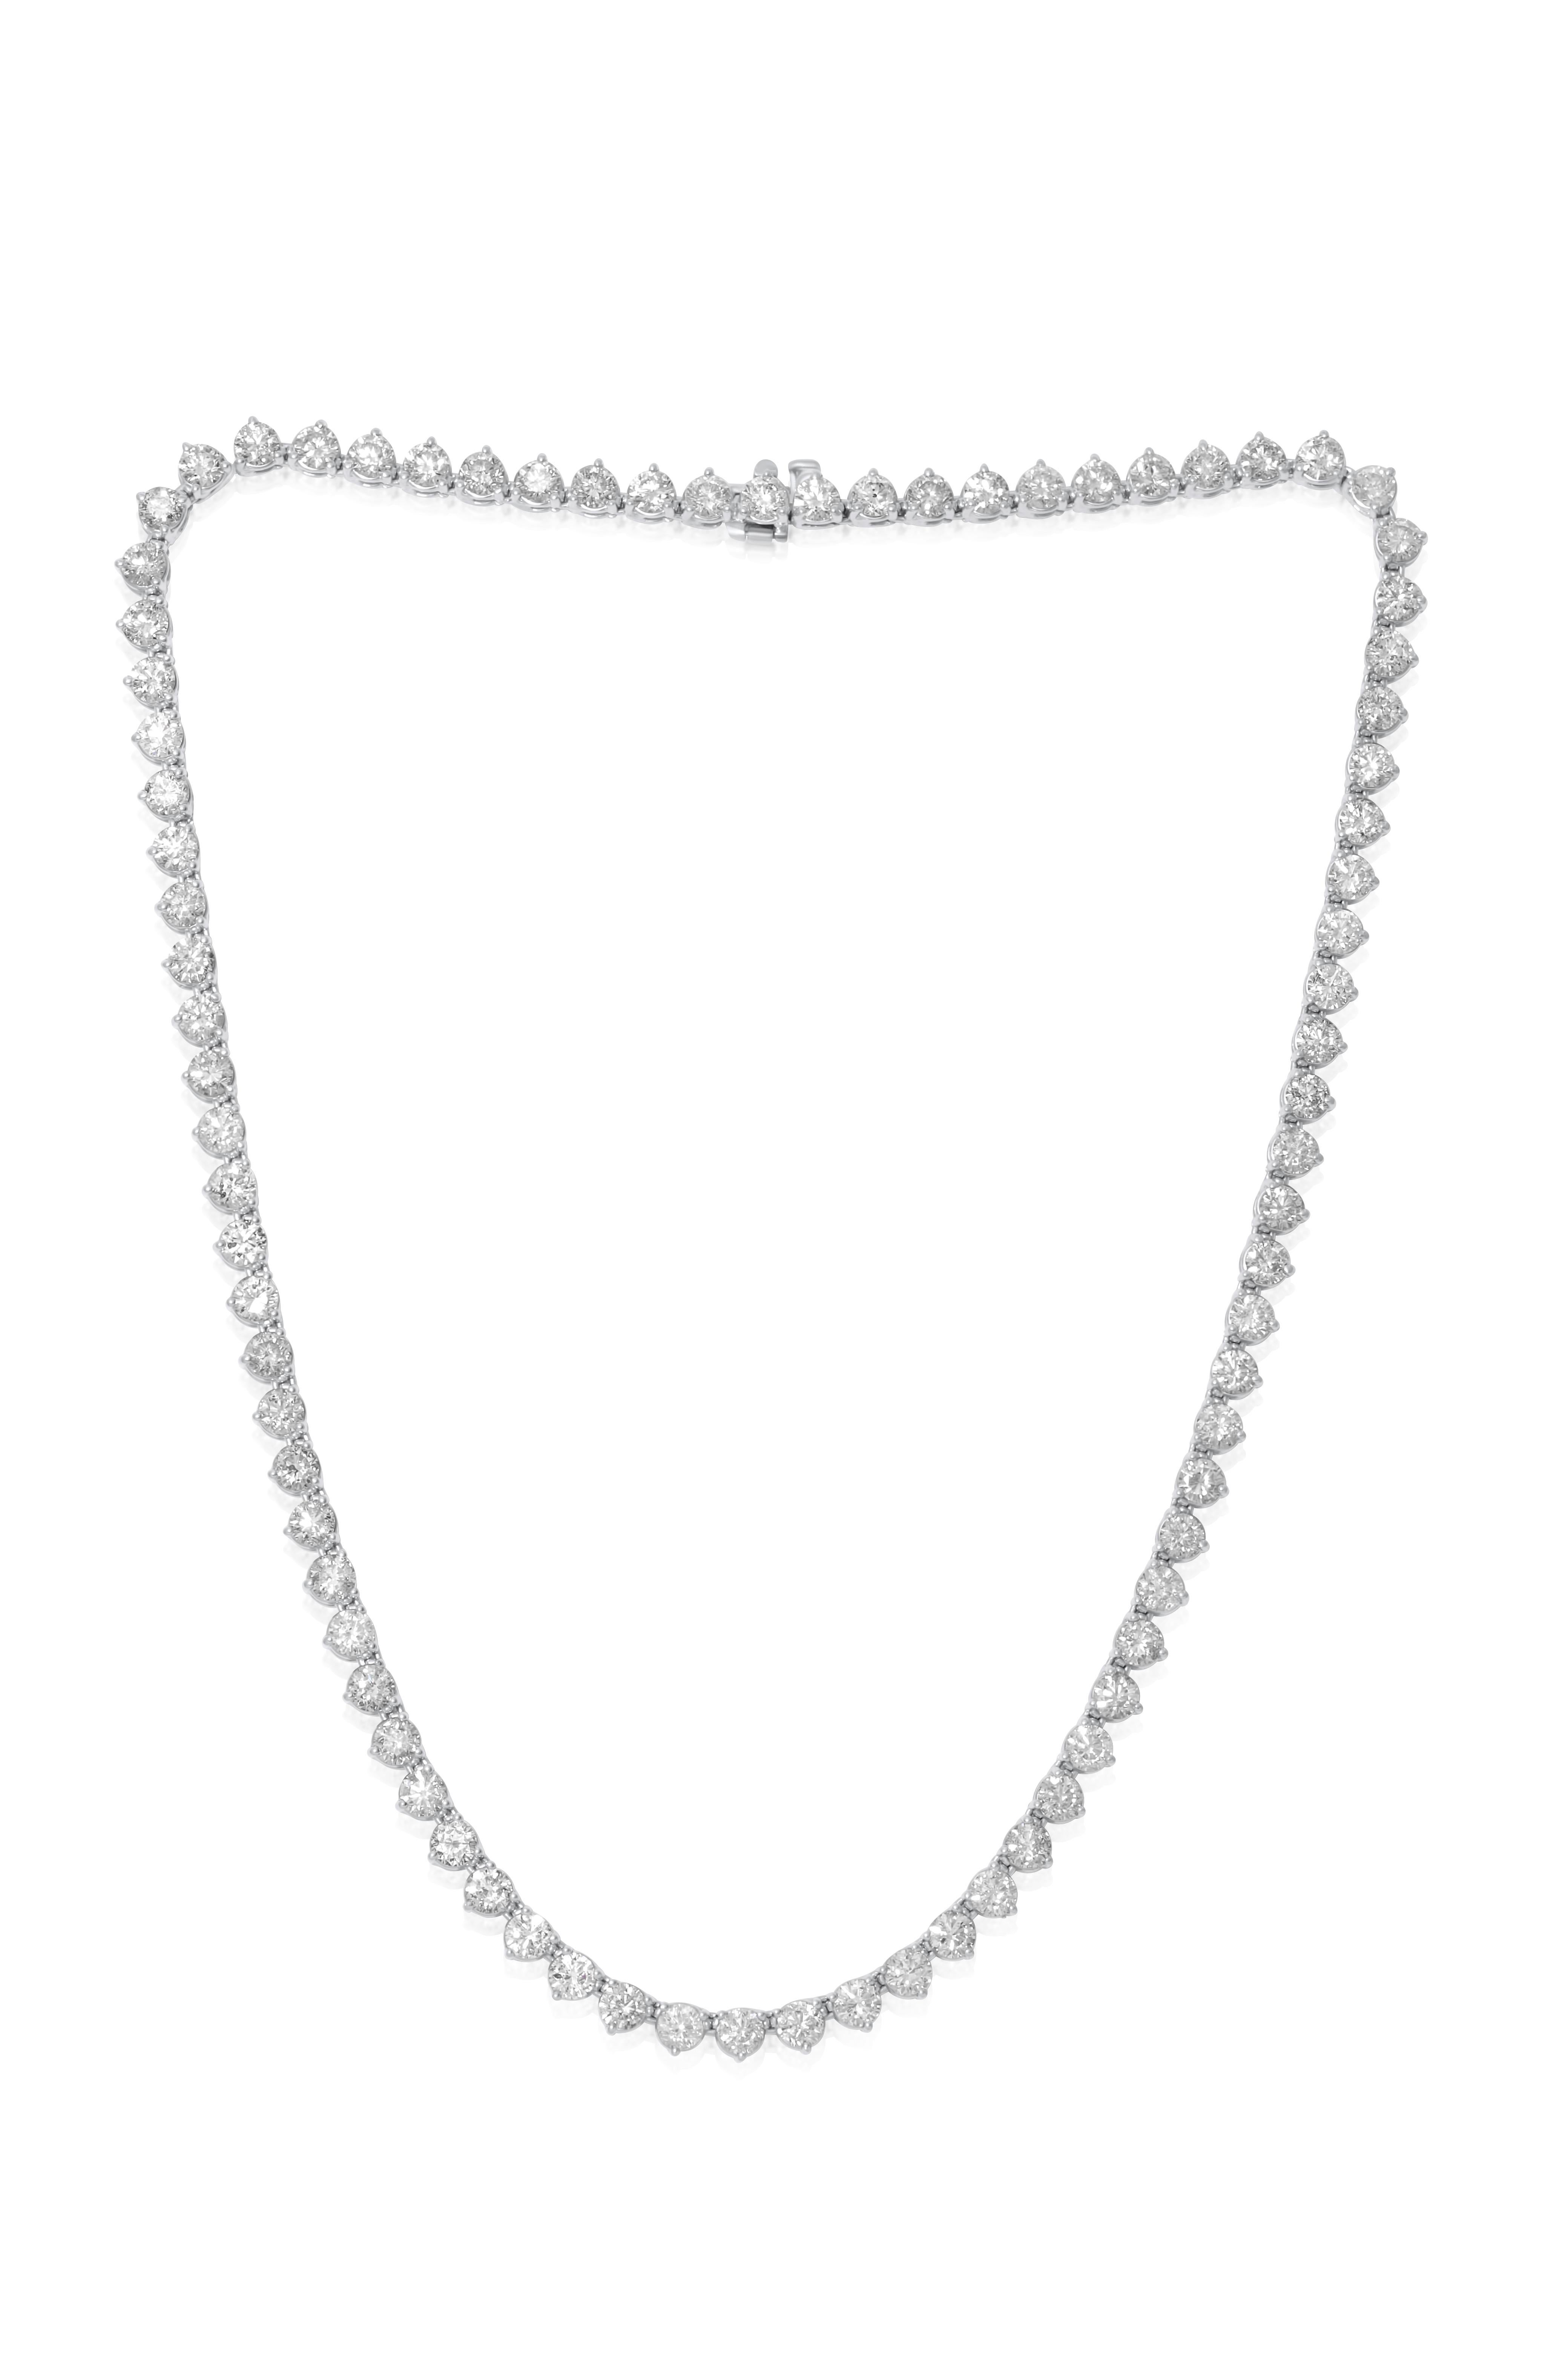 Brilliant Cut Diana M.  Custom 18.30cts 3-Prong Diamond Tennis  Necklace 18k White Gold For Sale